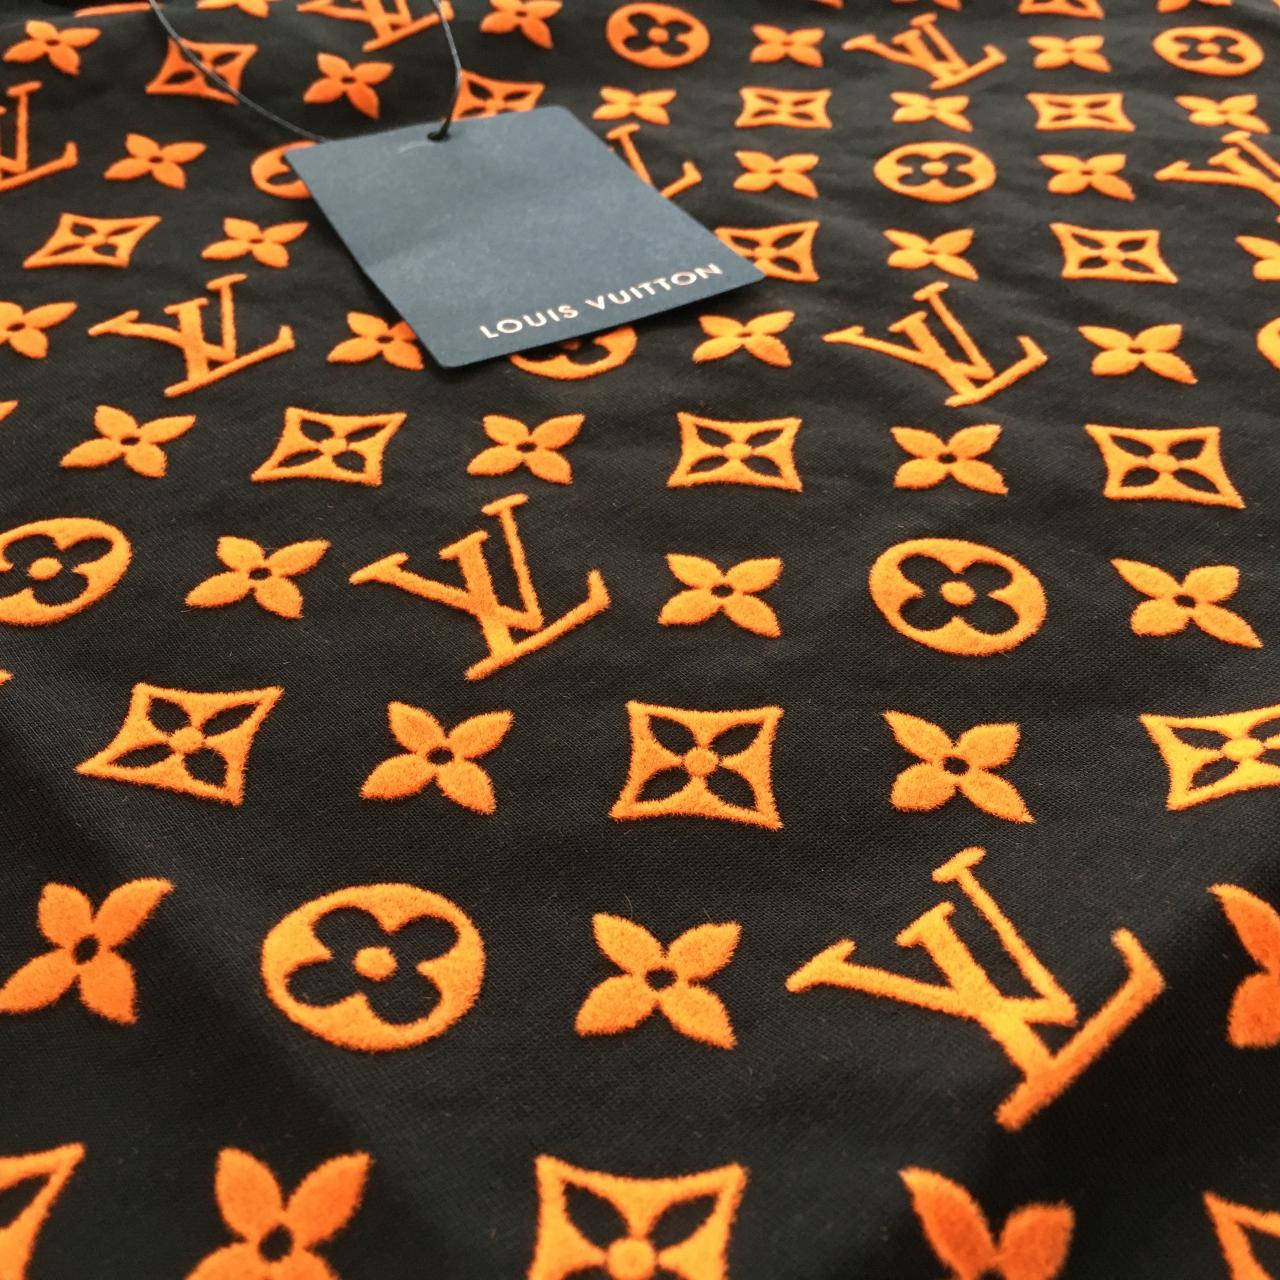 Brand new Louis Vuitton top with tag ! Size M/L/XL - Depop